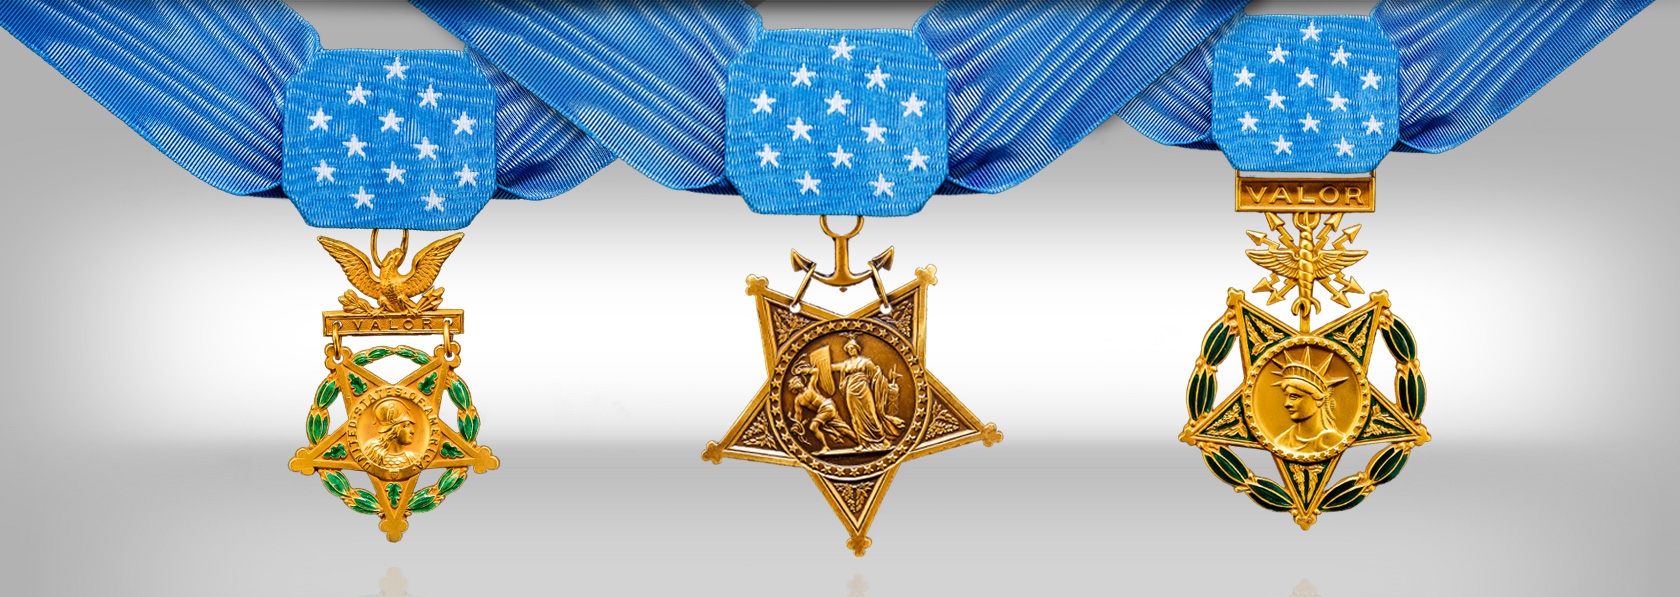 Army, Navy, and Air Force versions of the Medal of Honor